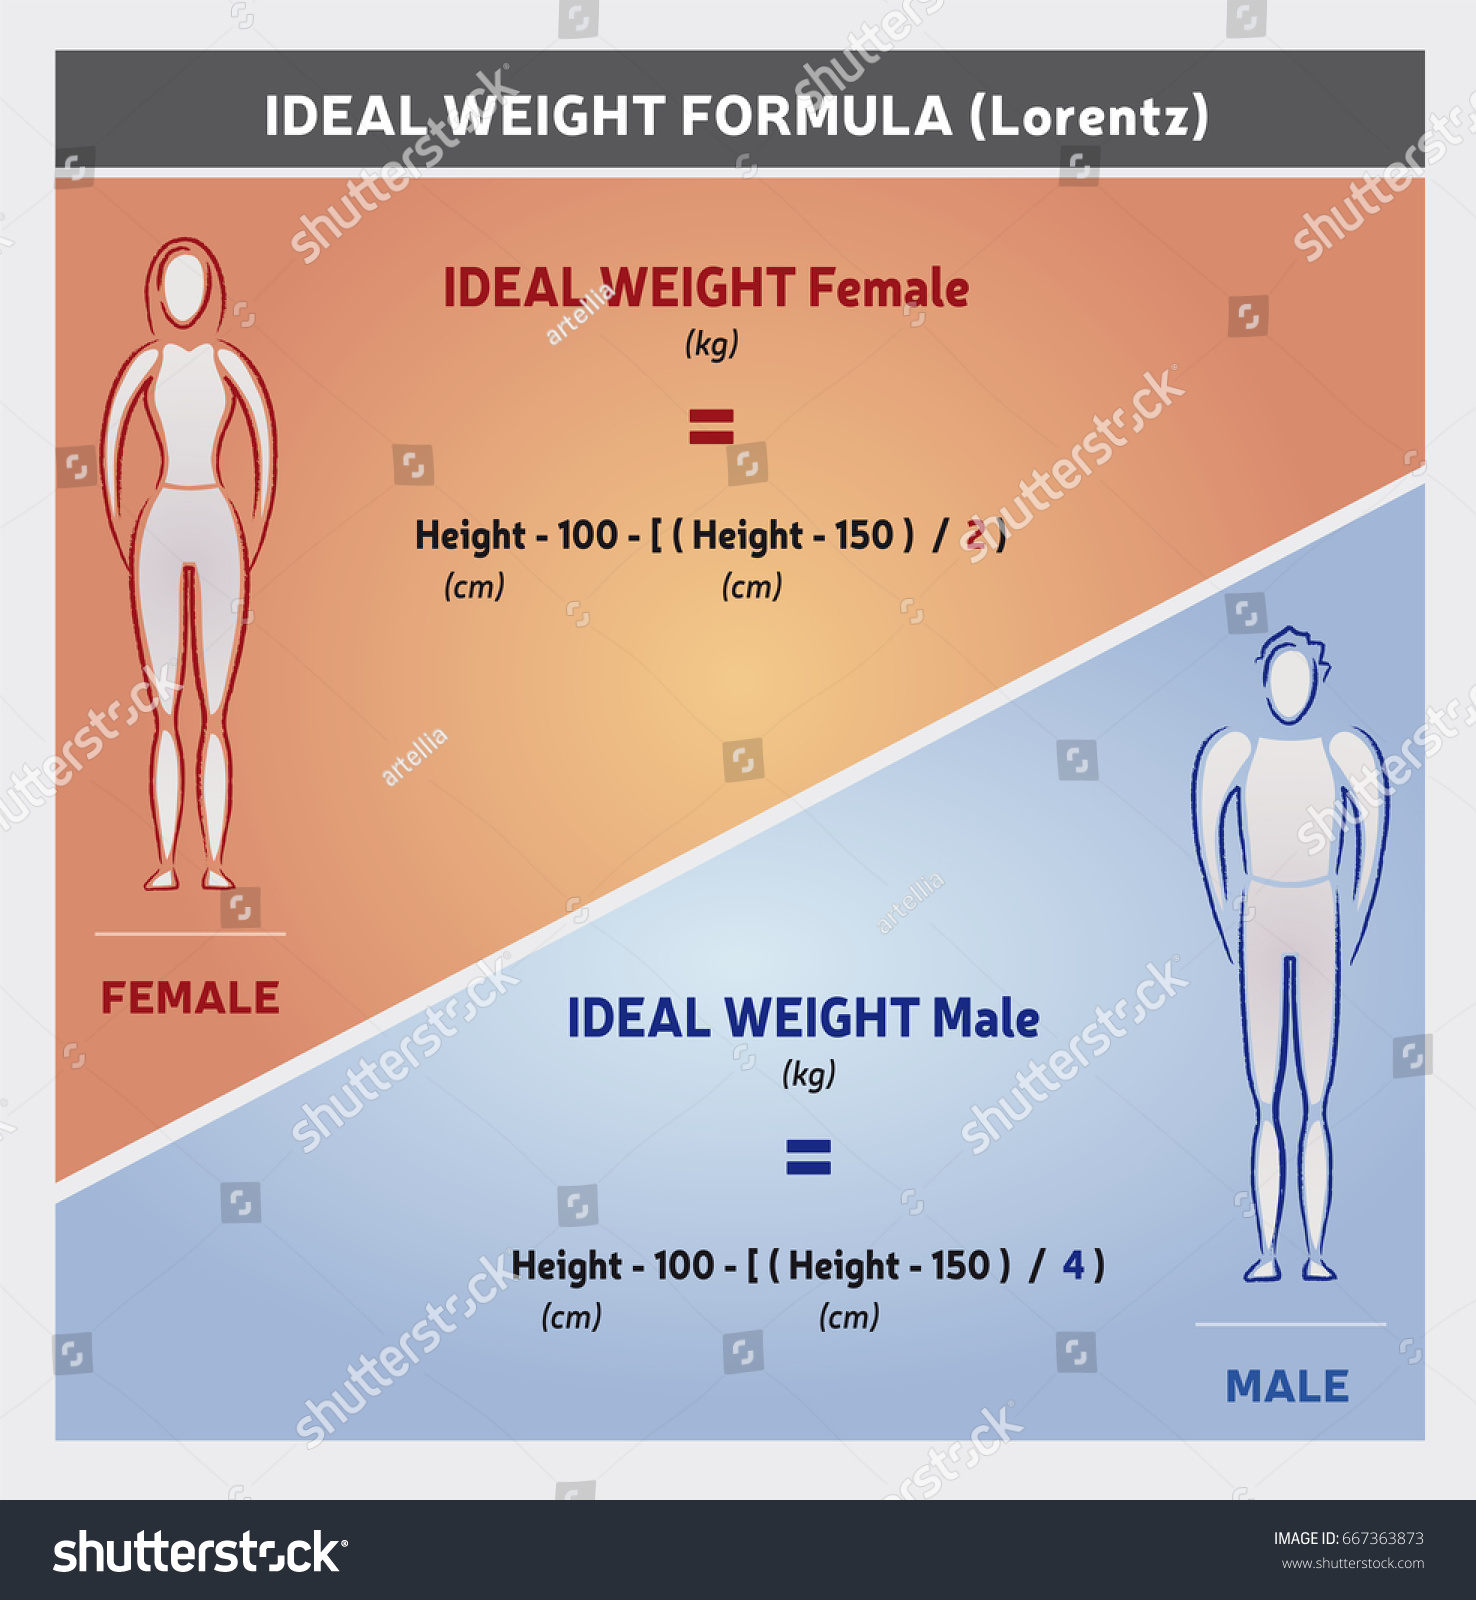 What Is The Ideal Weight